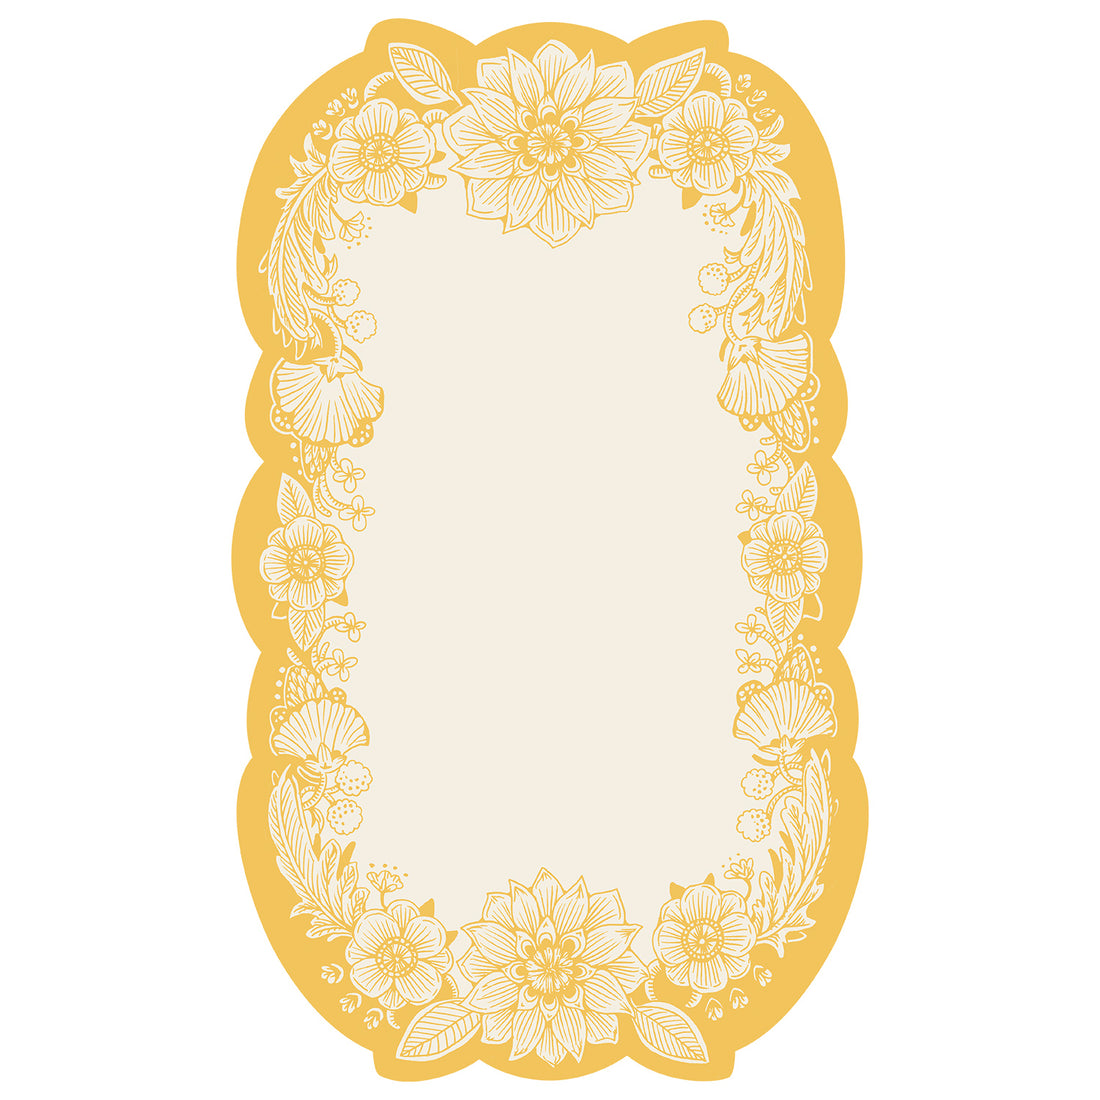 A white, die-cut rectangular card framed by an ornate floral design in bright yellow linework surrounding a blank white center rectangle for personalization.